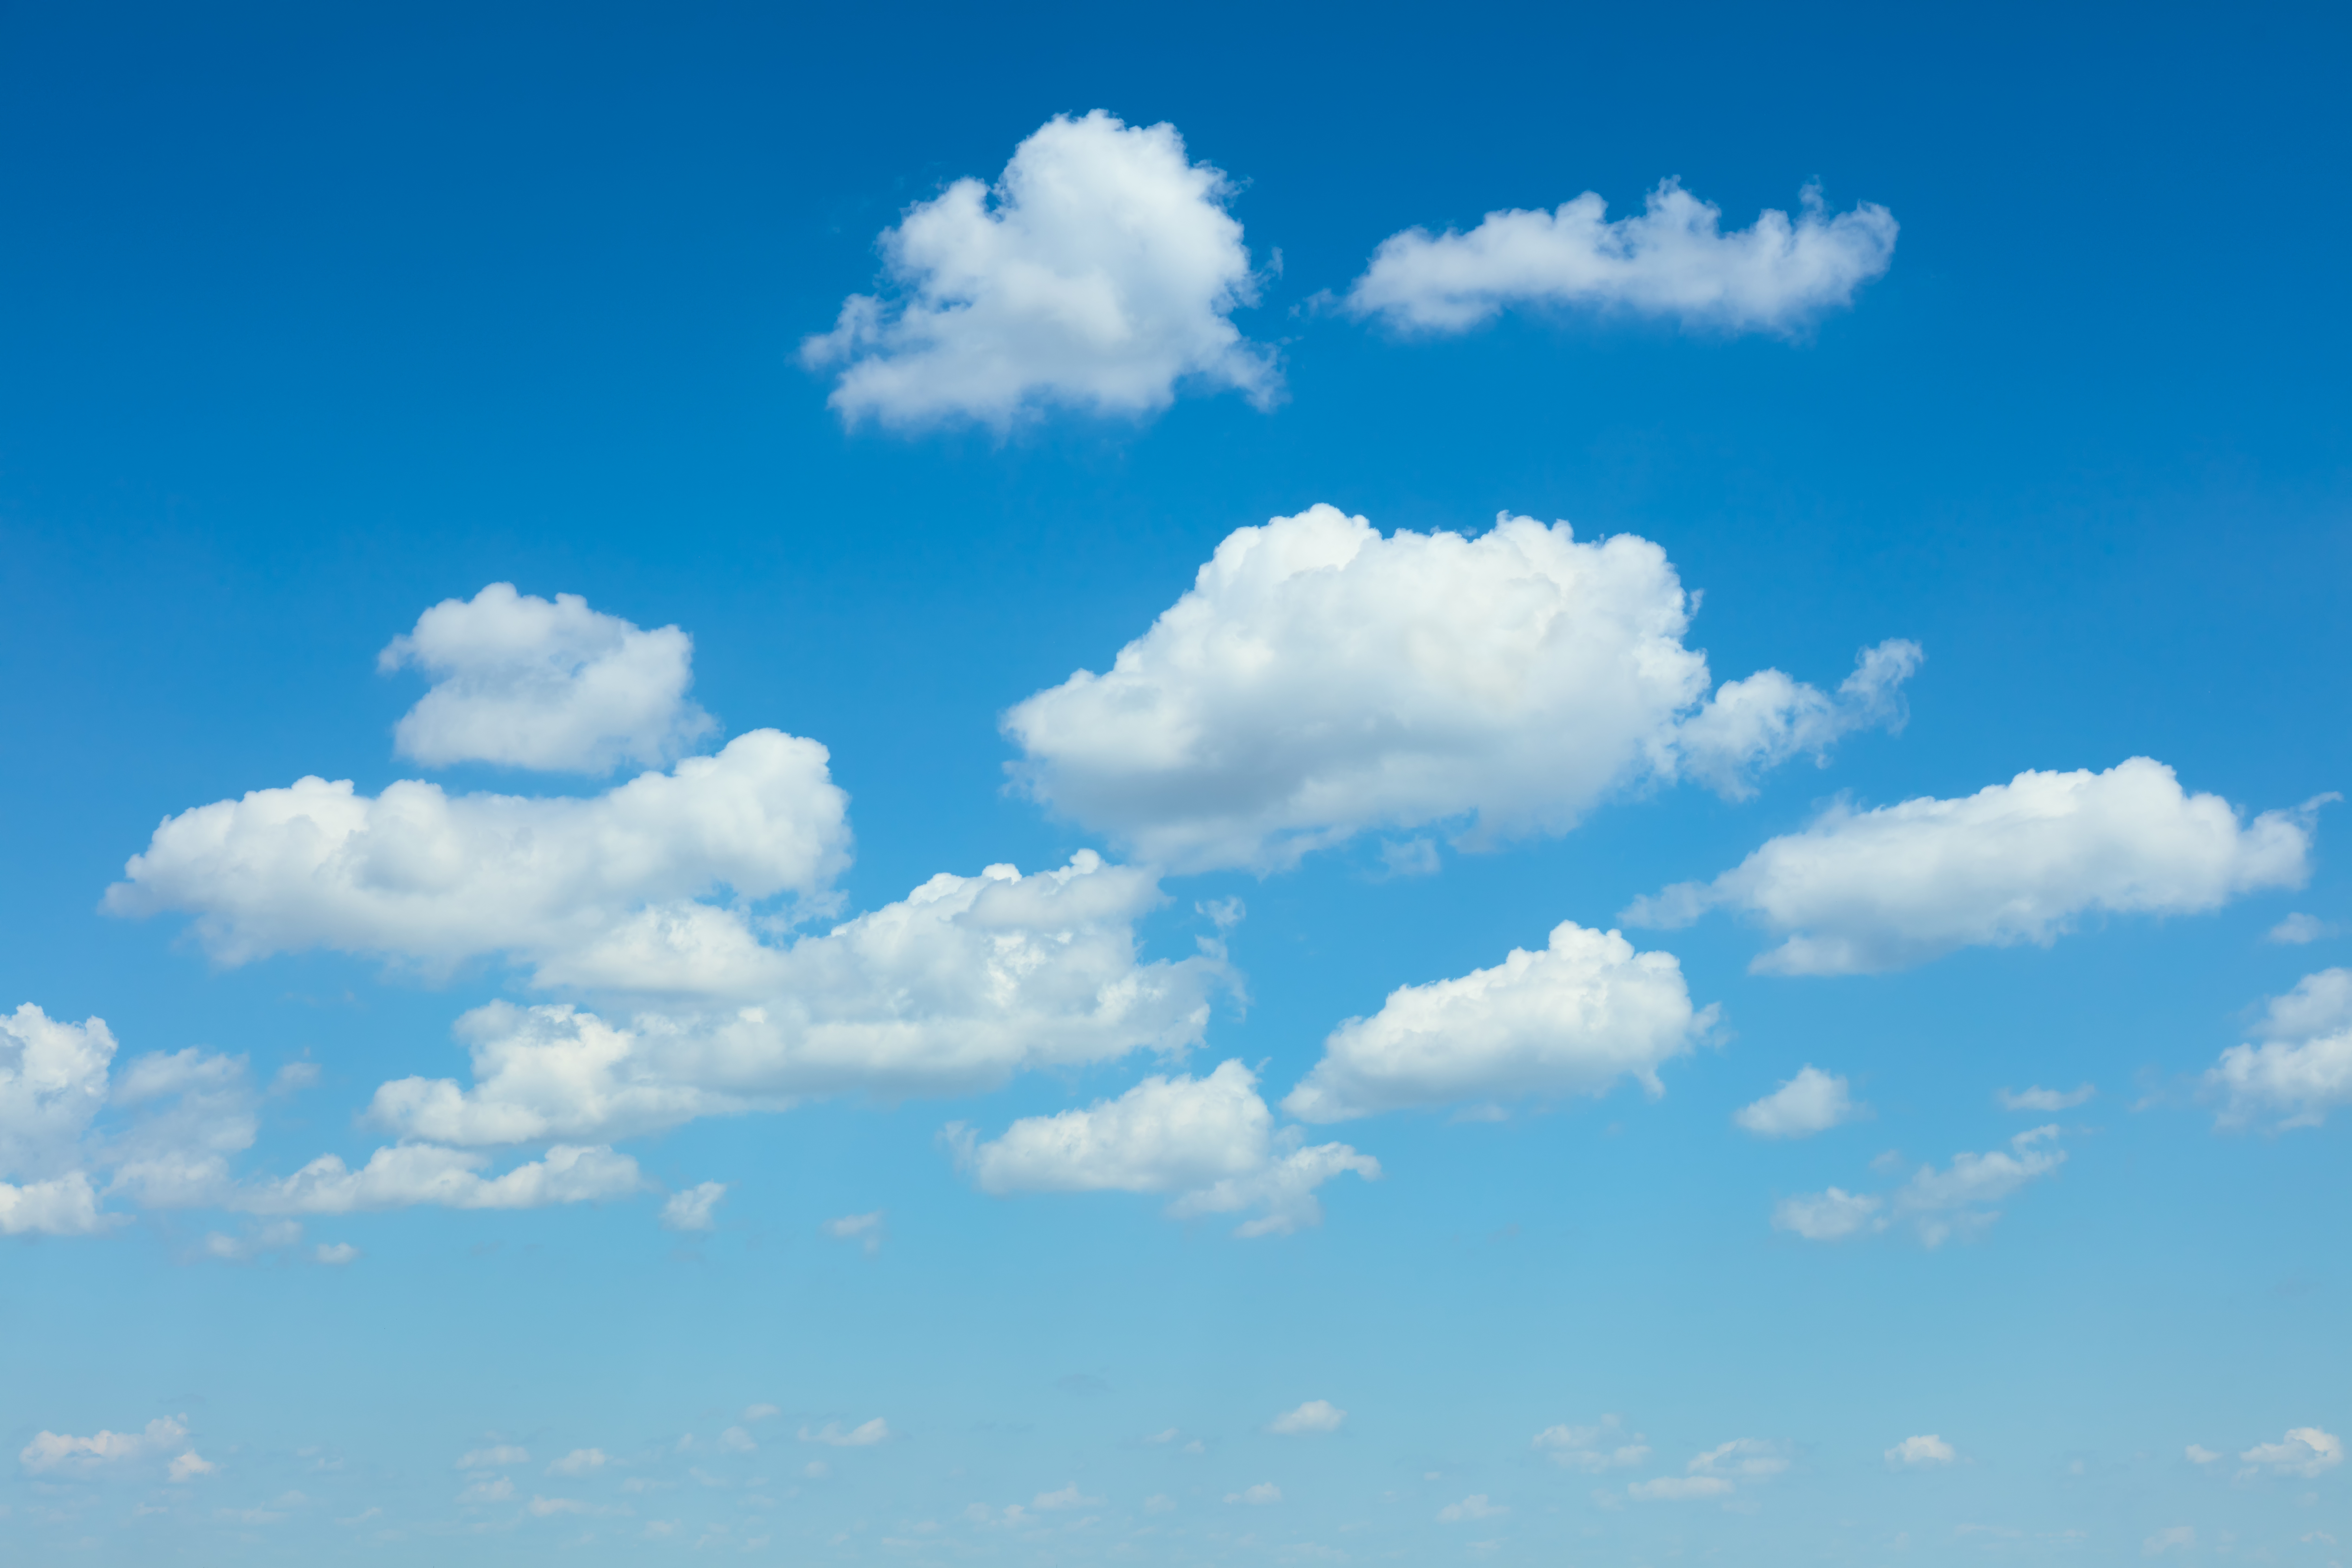 Light blue sky and white clouds background - big size ©Taiga/Adobe Stock